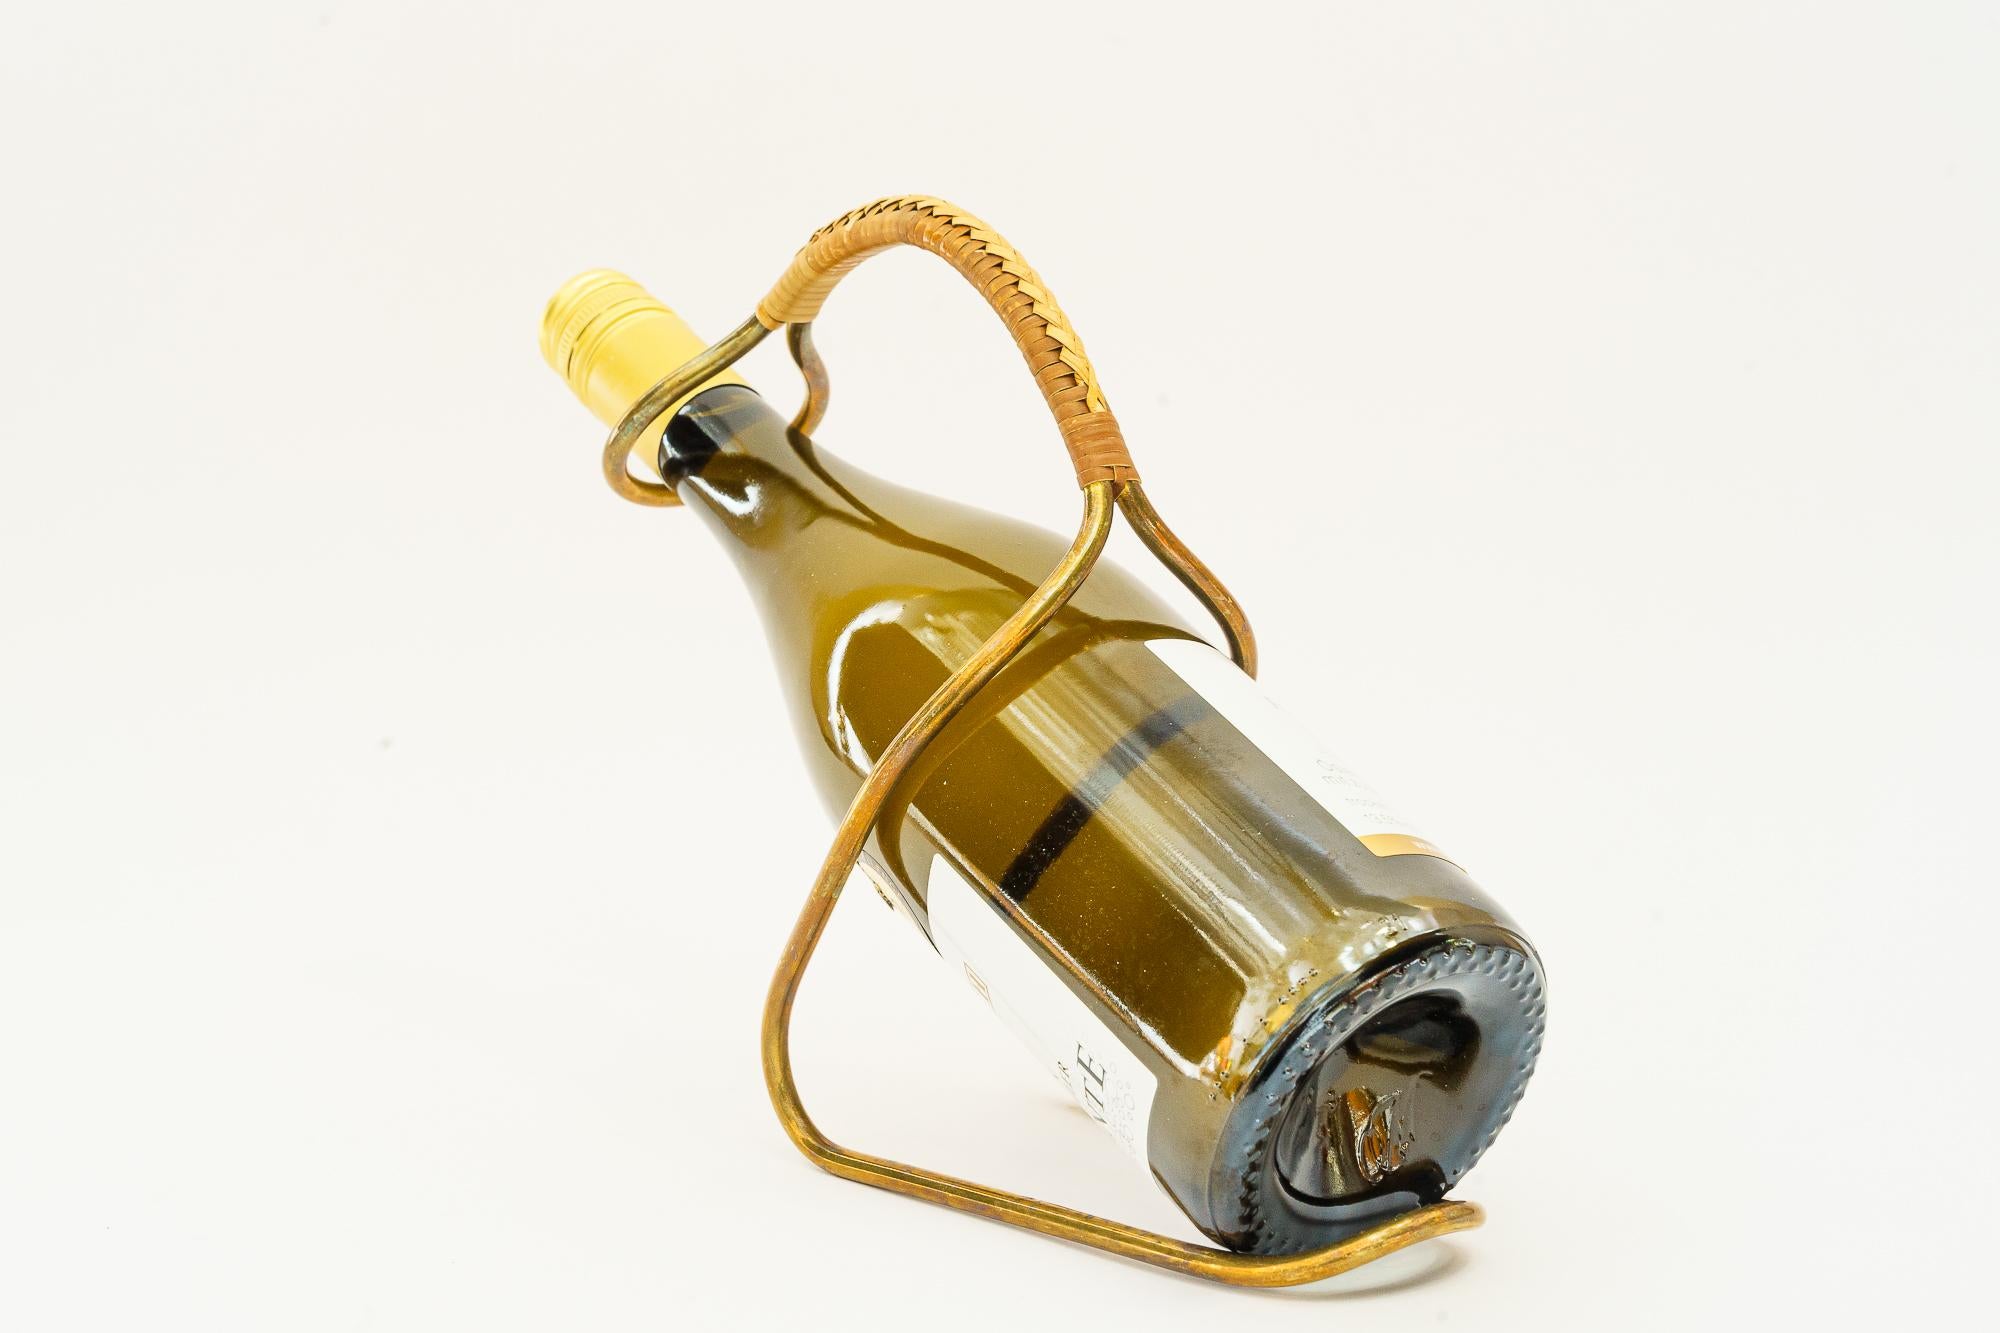 Bottle Holder by Auböck Around 1950s
The bottle is not includet it is only for the photoshooting.